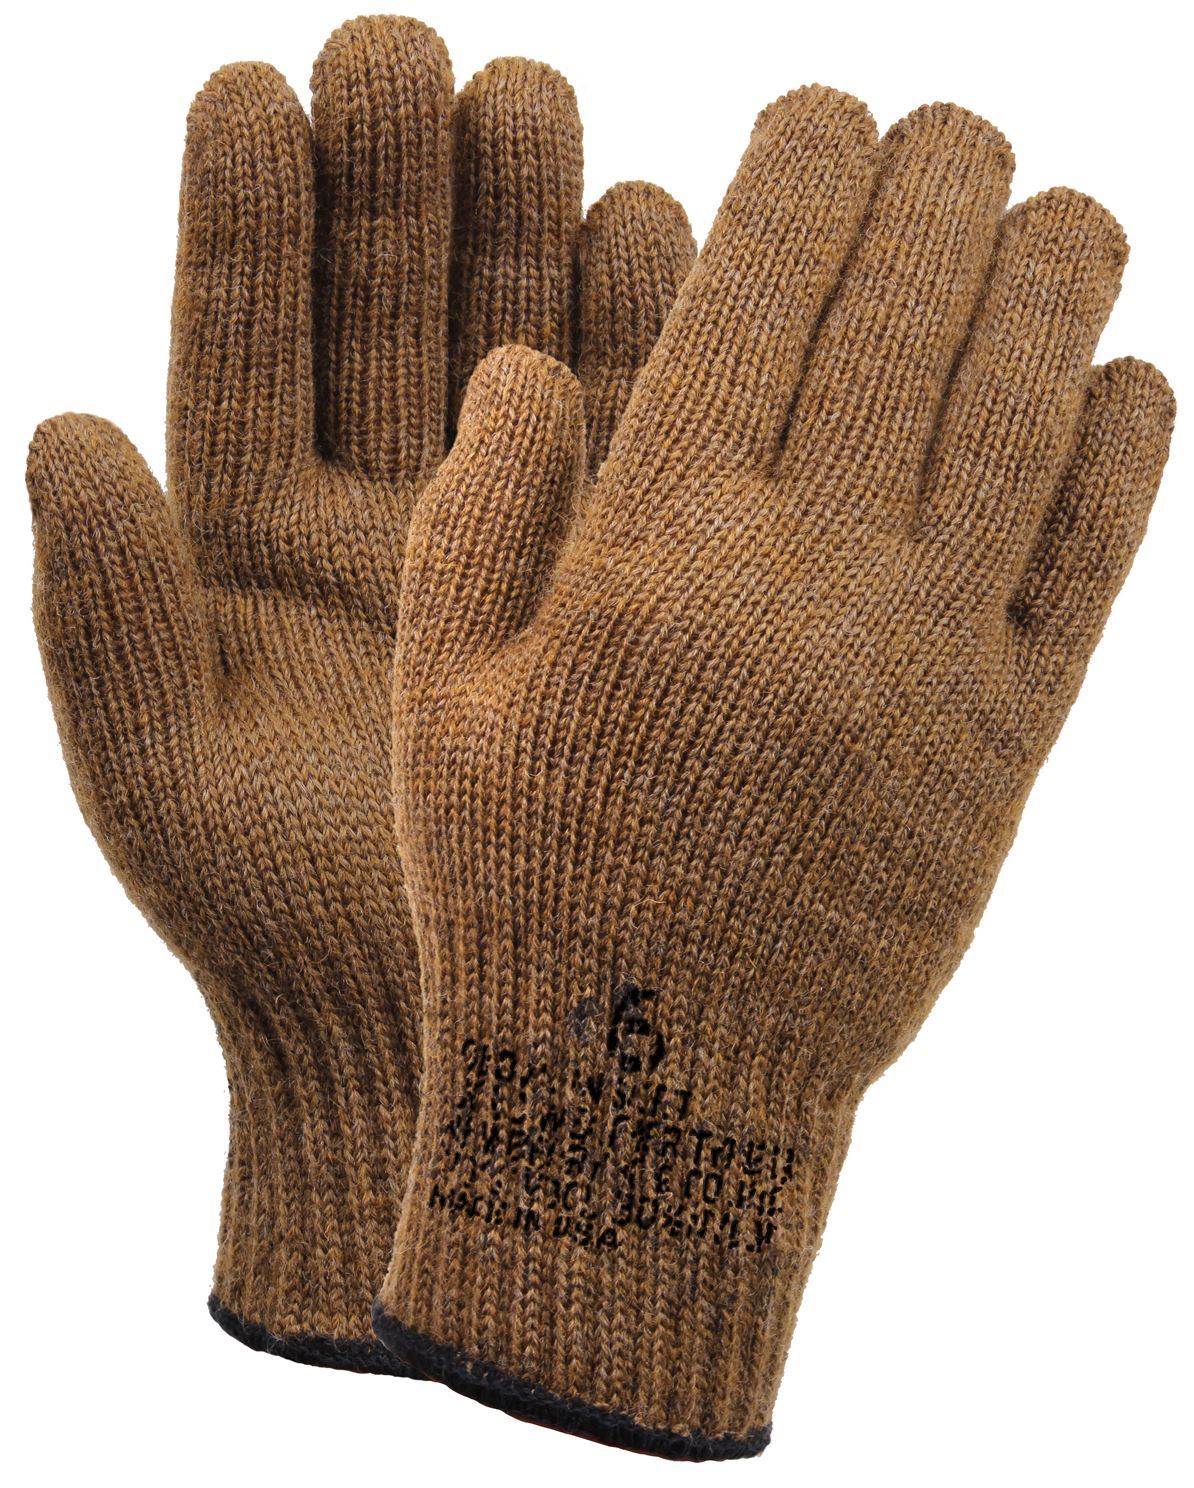 Tactical G.I. Glove Liners Color : Coyote Brown, Size : 4 (5 per pack)